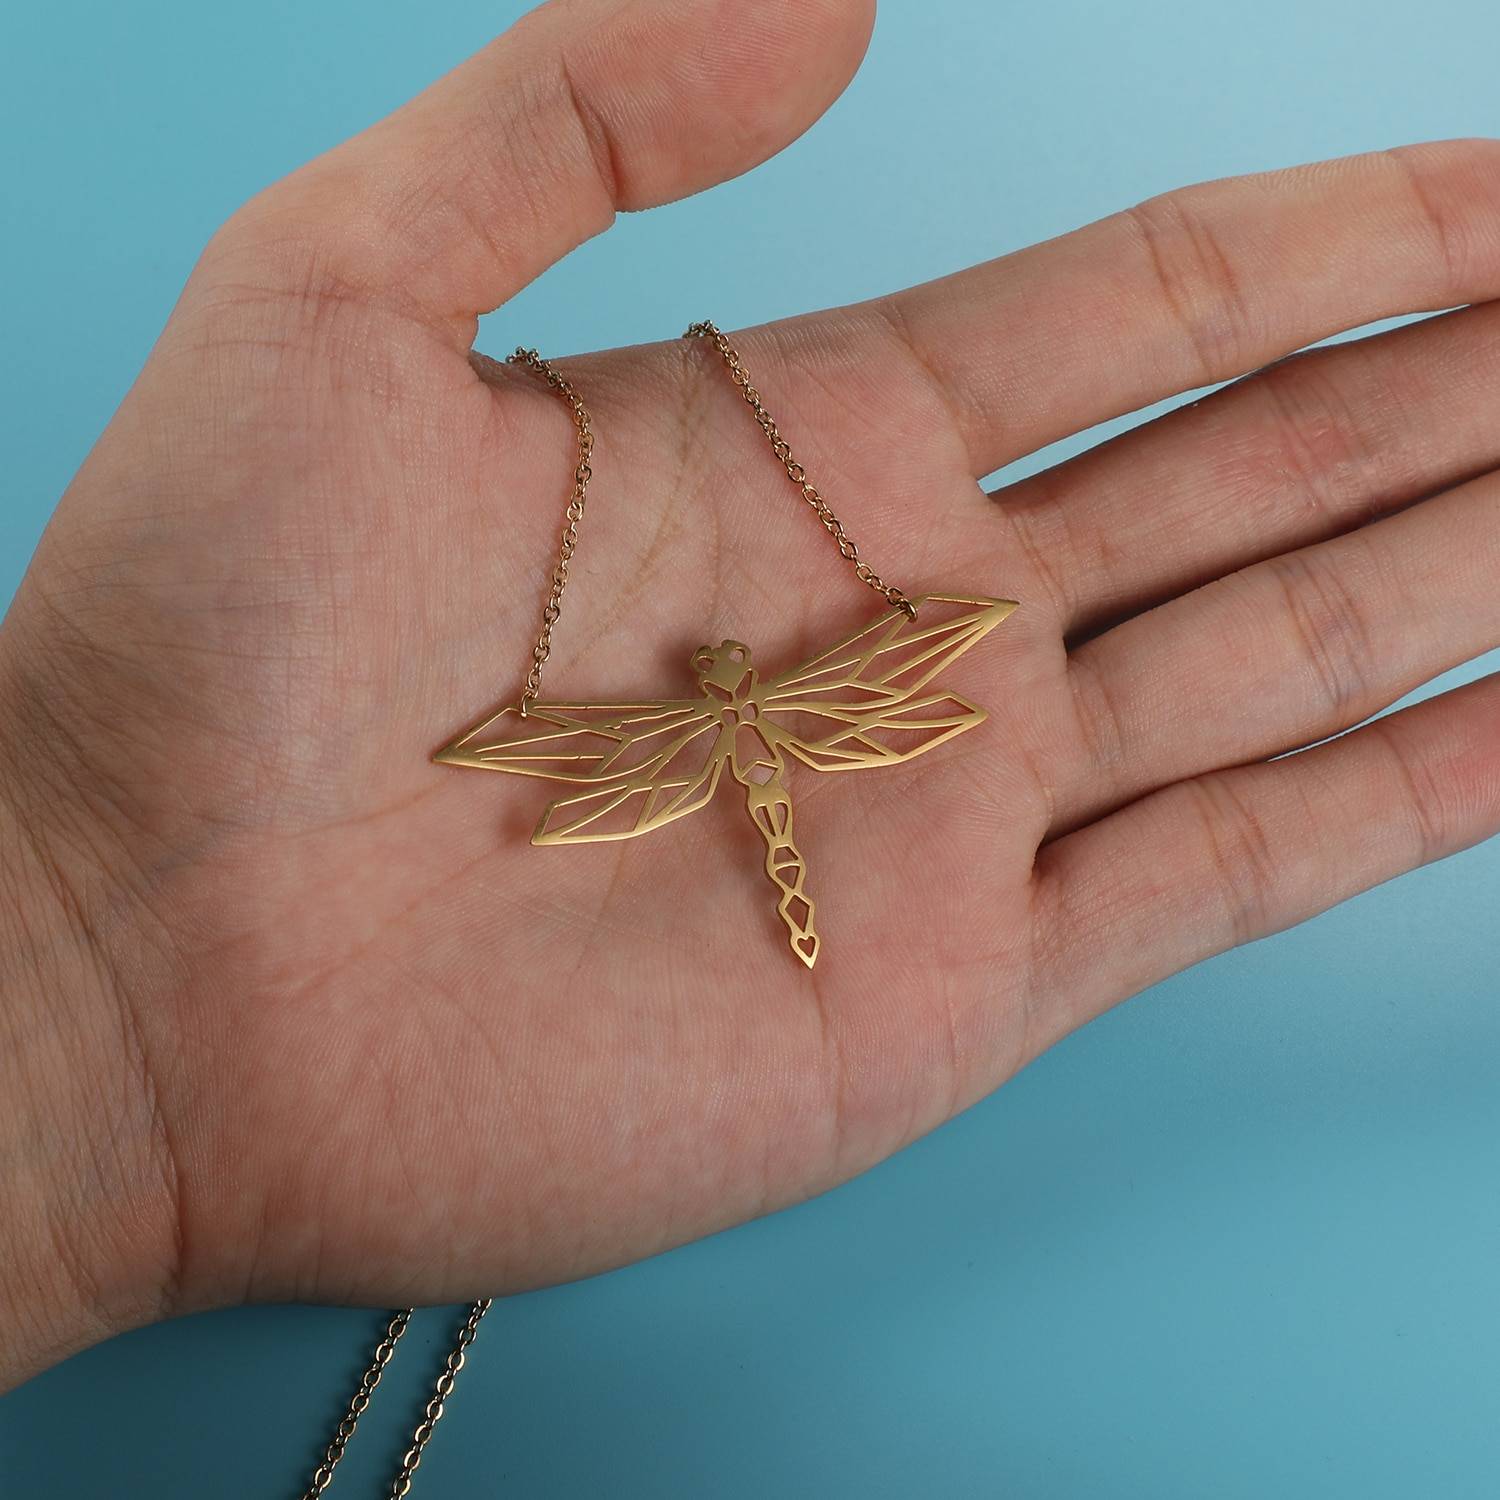 Dancing Dragonfly Origami Necklace in hand